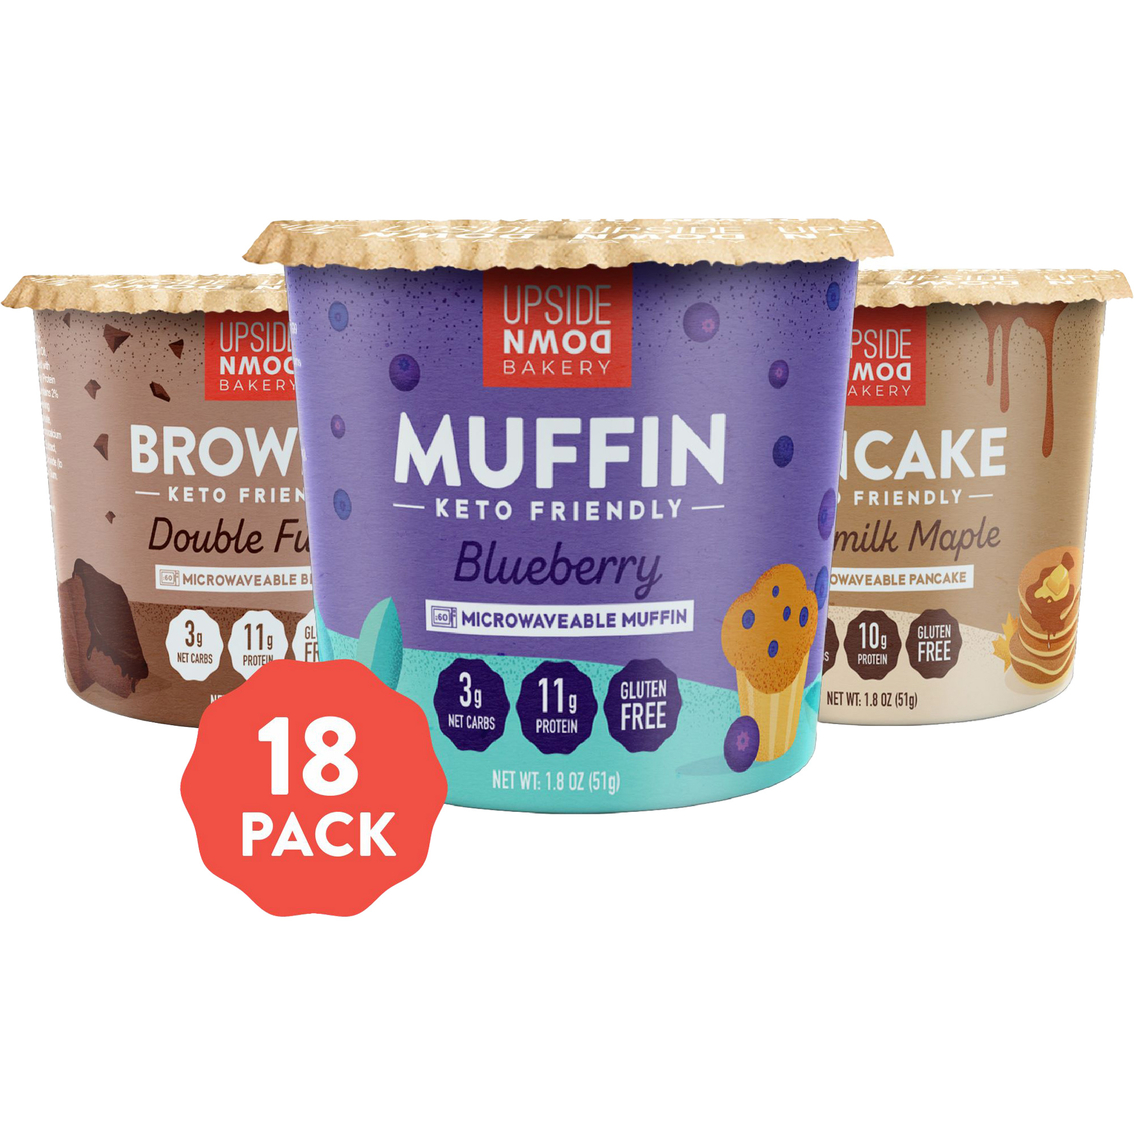 Upside Down Bakery Muffin, Brownie, Pancake Variety Pack 18 cups, 1.8 oz. each